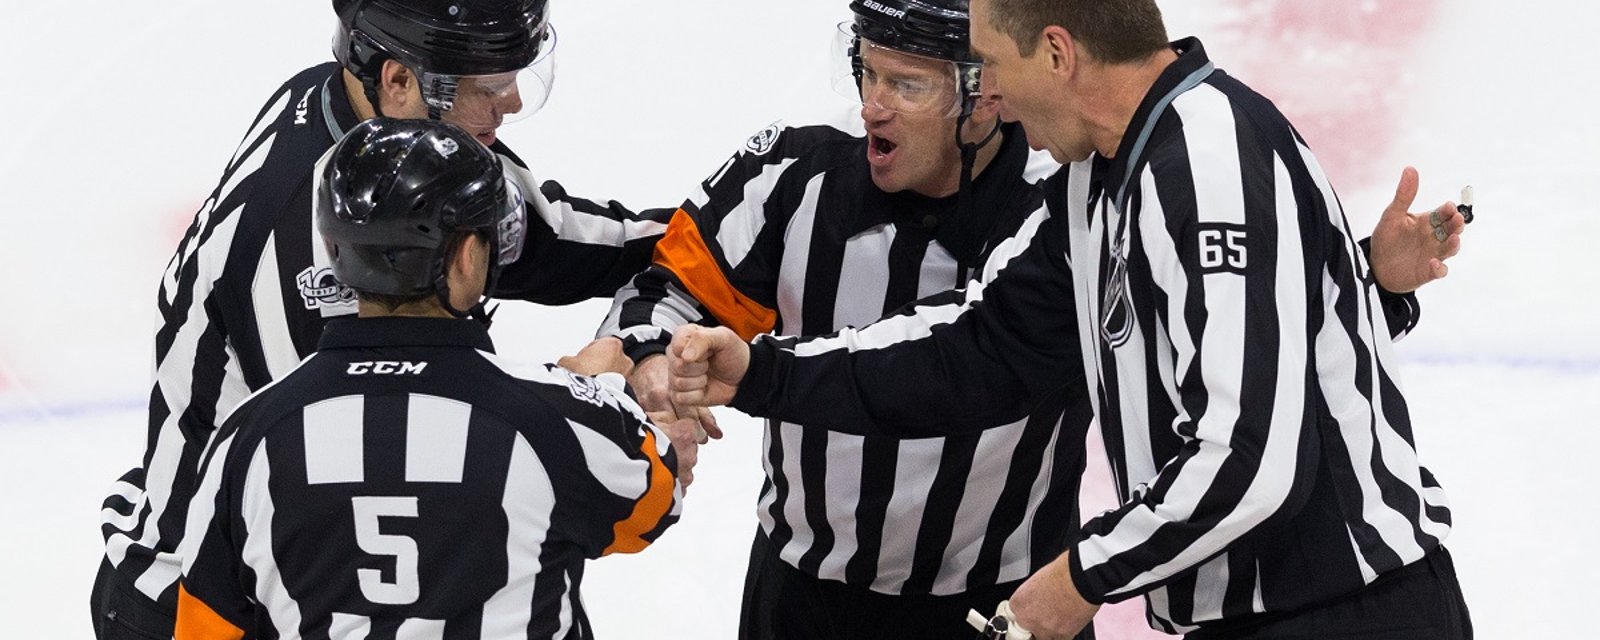 Breaking: NHL officials have just made one of the worst calls you'll ever see.